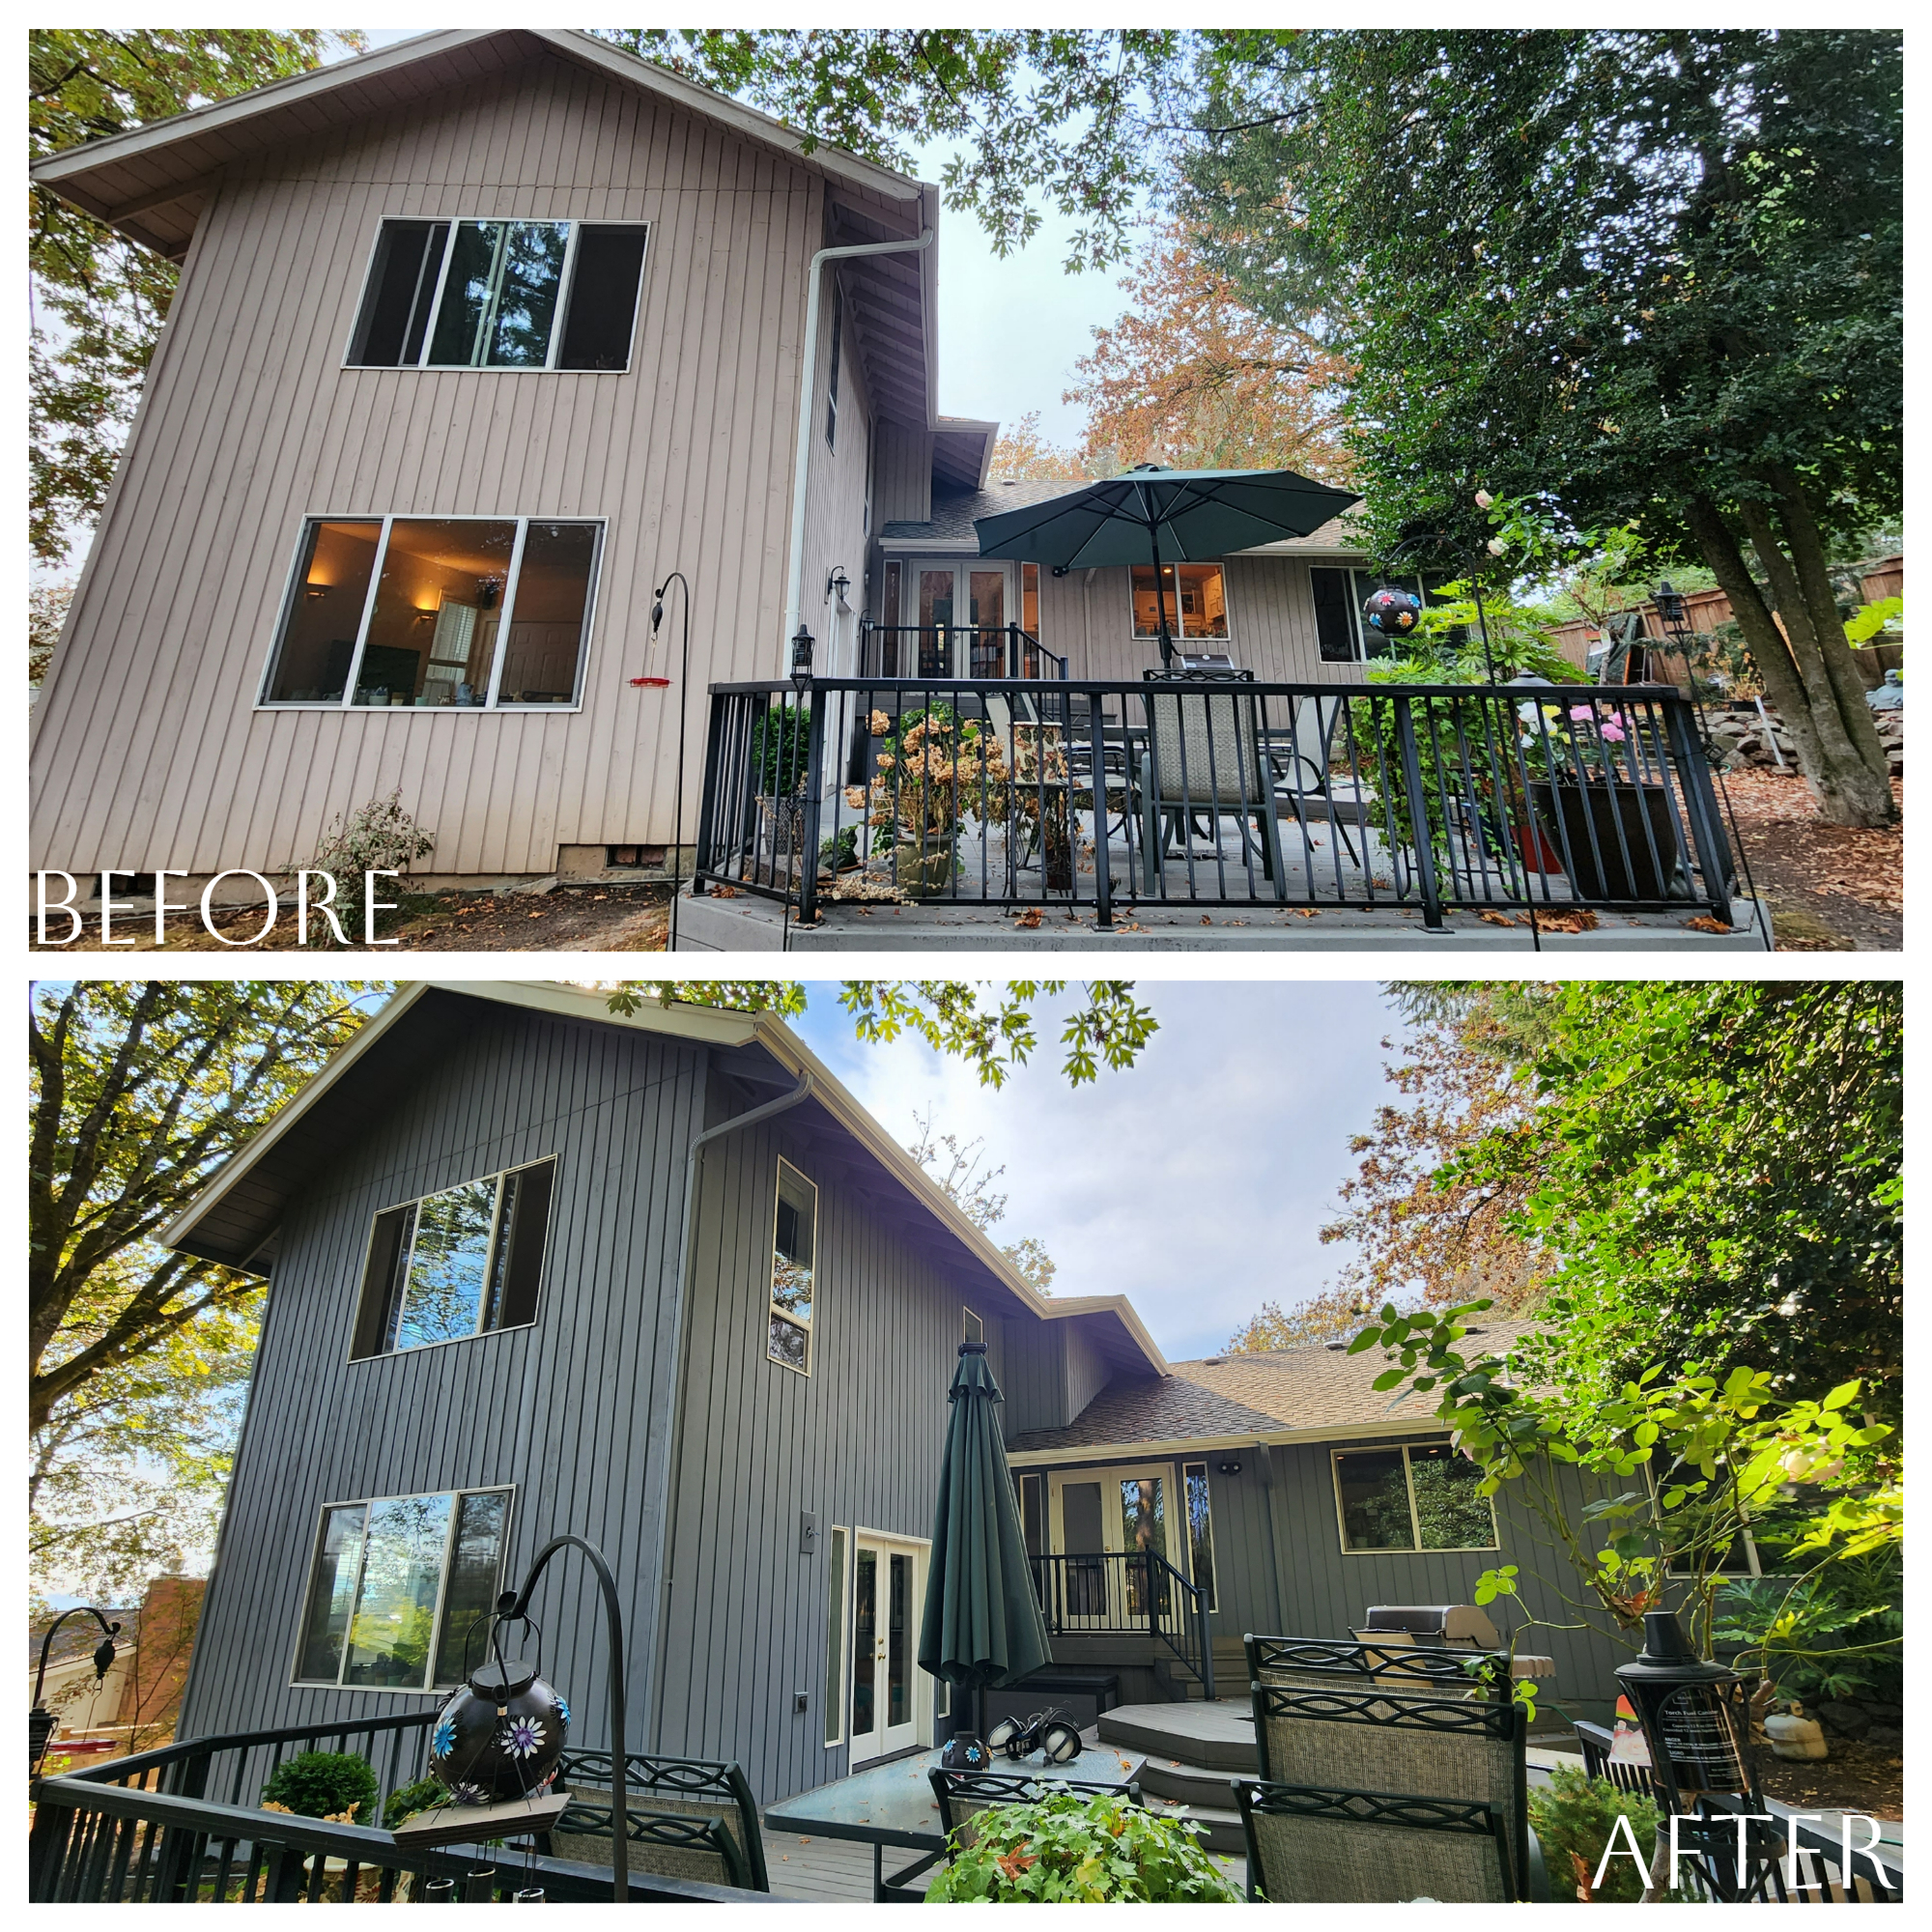 Before and after photos of a home with a secure deck and patio.